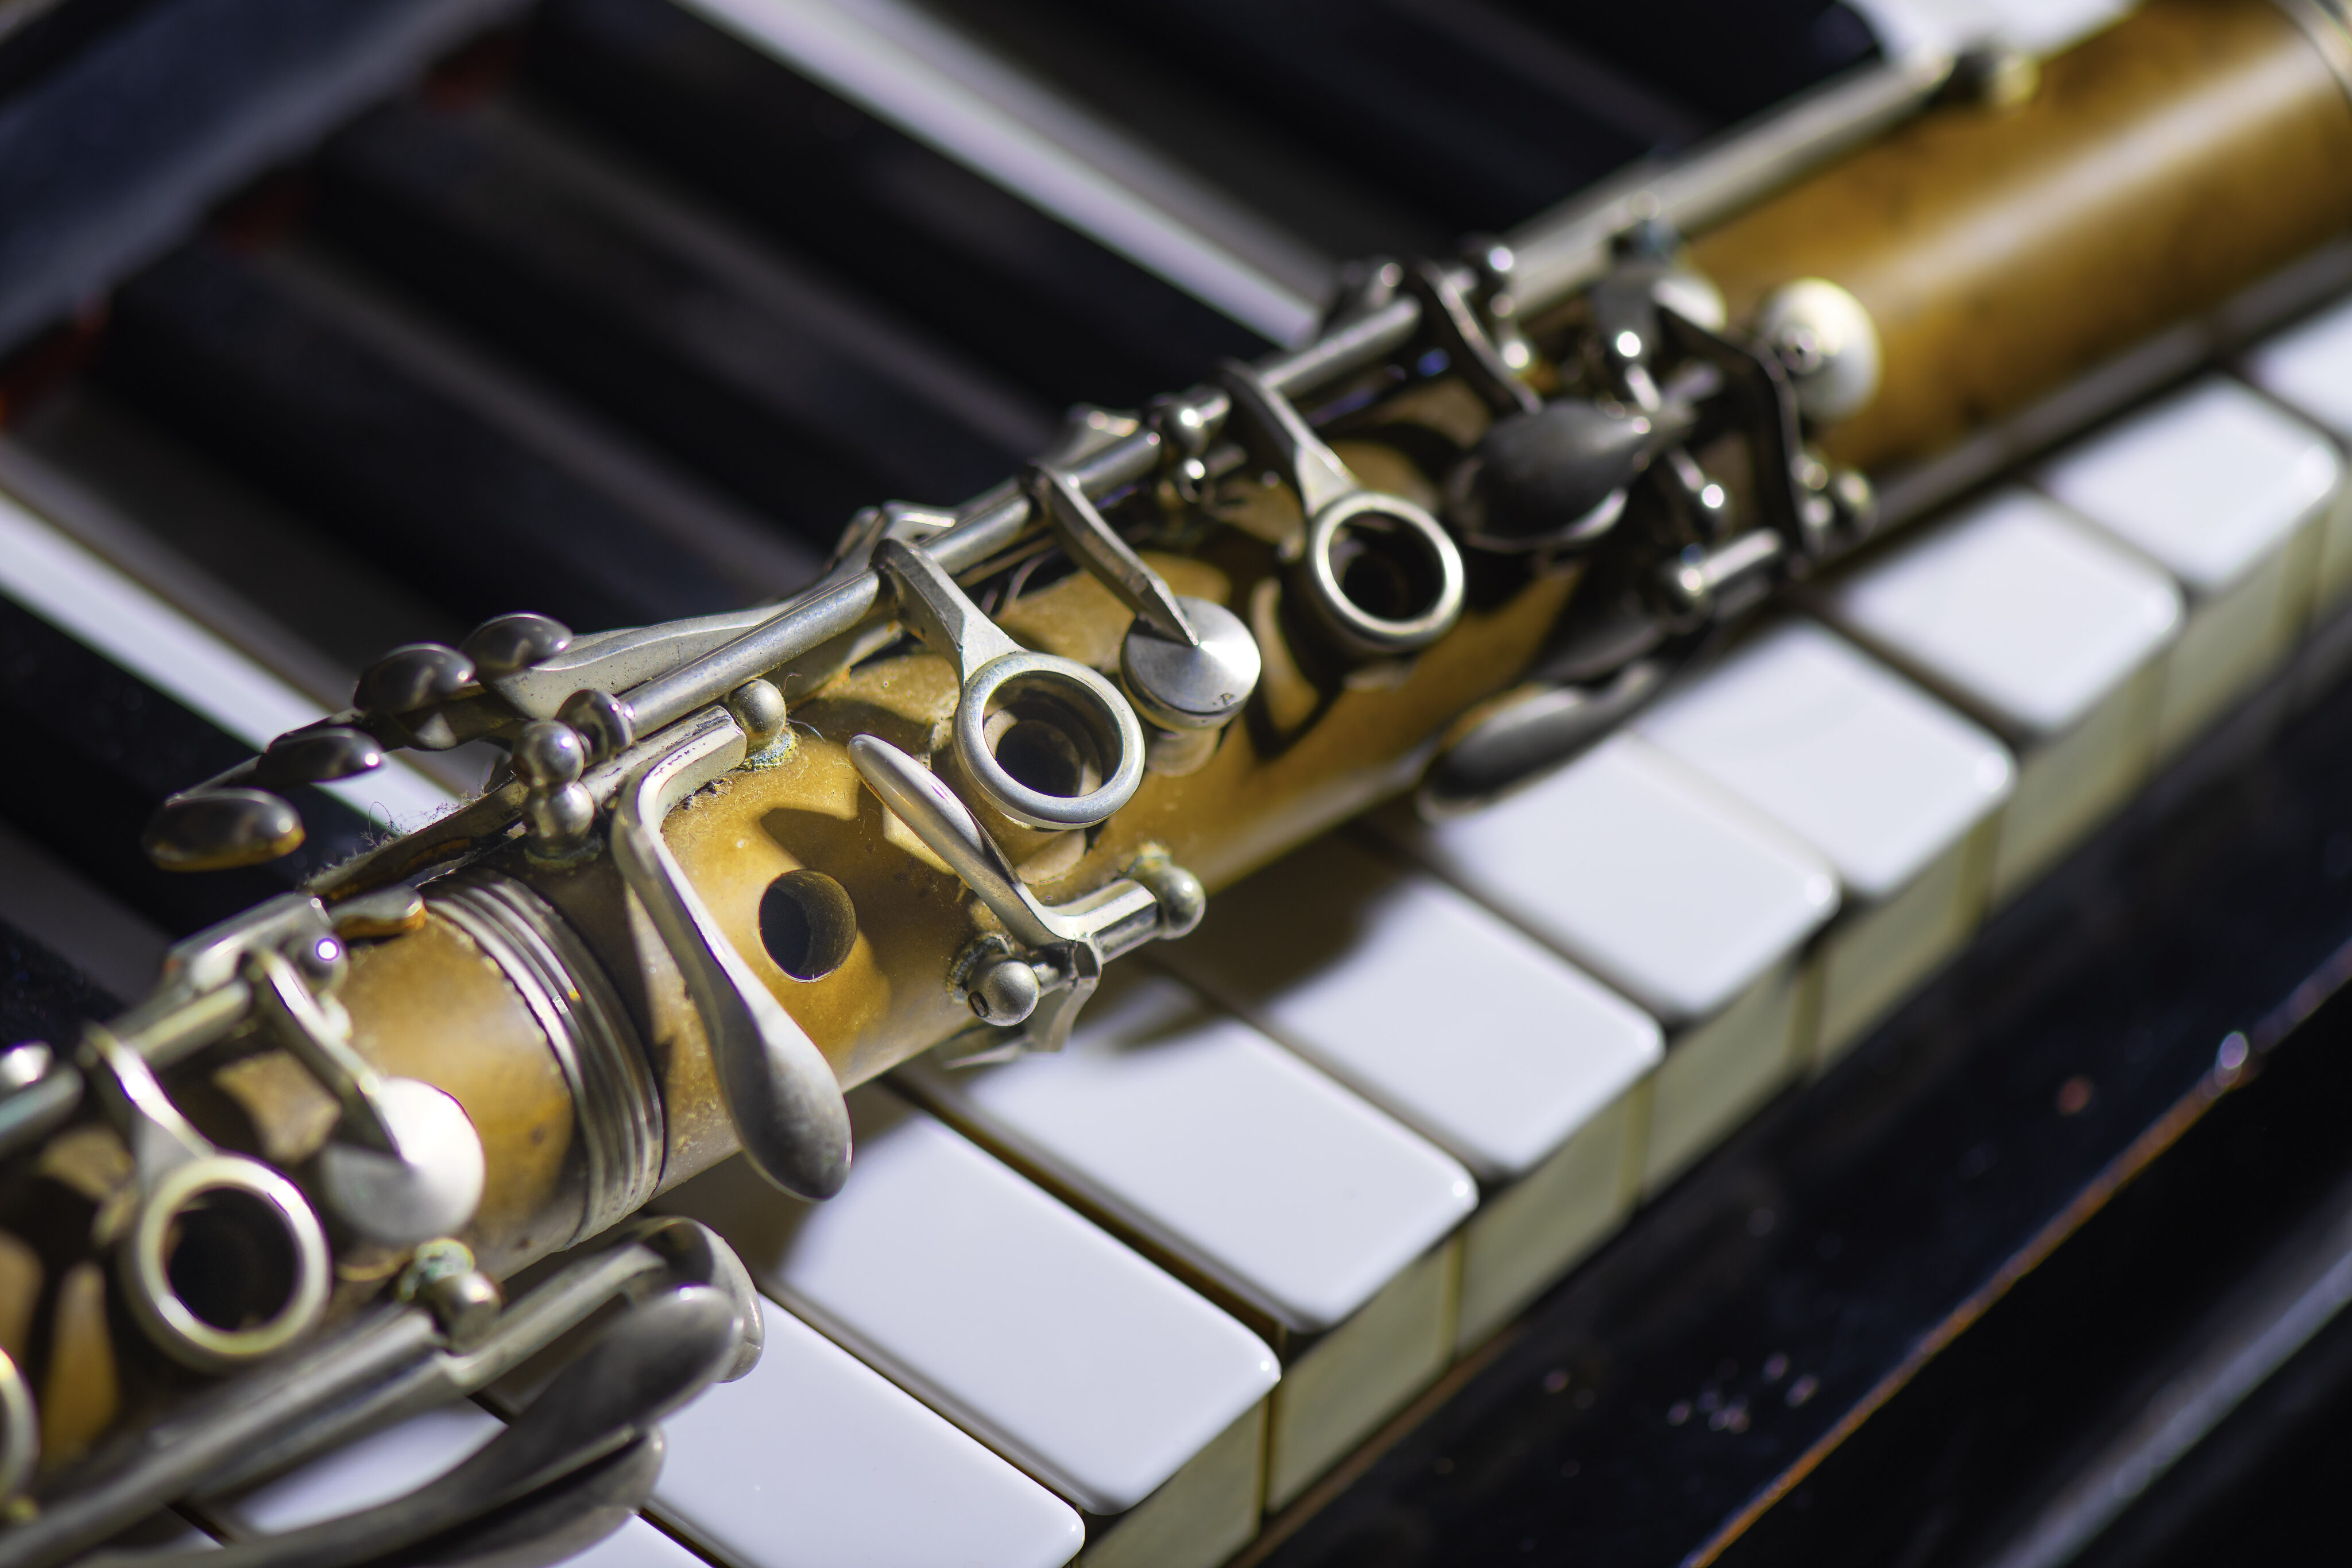 Antique clarinet leaning on piano key